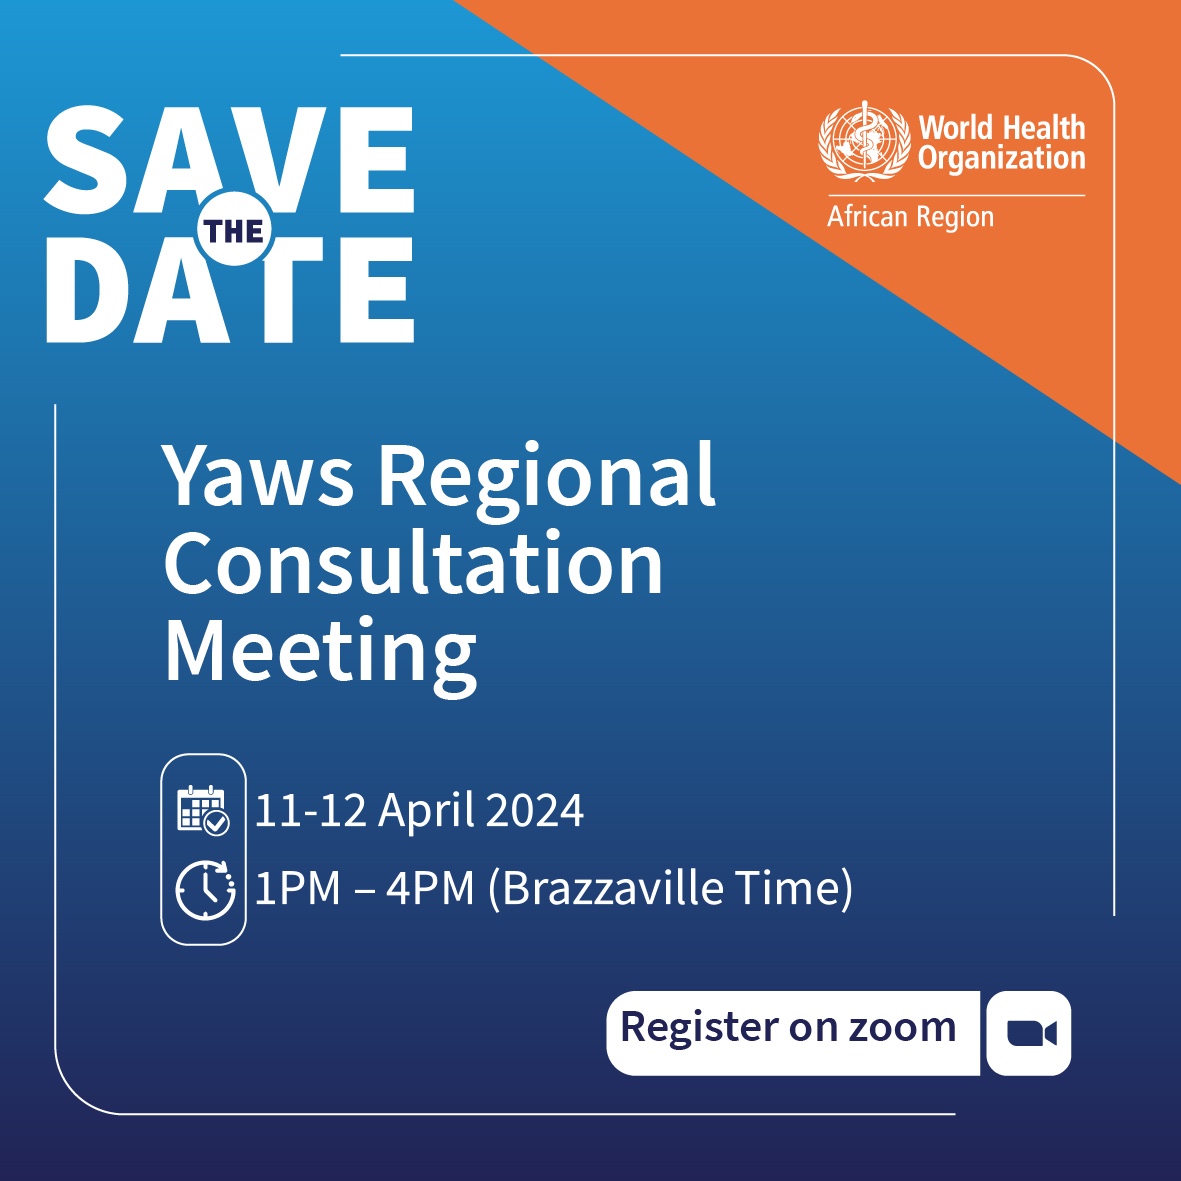 Three World Health Assembly resolutions have targeted yaws for eradication. A virtual consultation meeting will discuss actions to eradicate the disease by 2030. Join in! Date📅 : 11-12 April 2024 Time⏰: 1PM – 4PM (Brazzaville Time) Register here 👇🏿: who.zoom.us/webinar/regist…